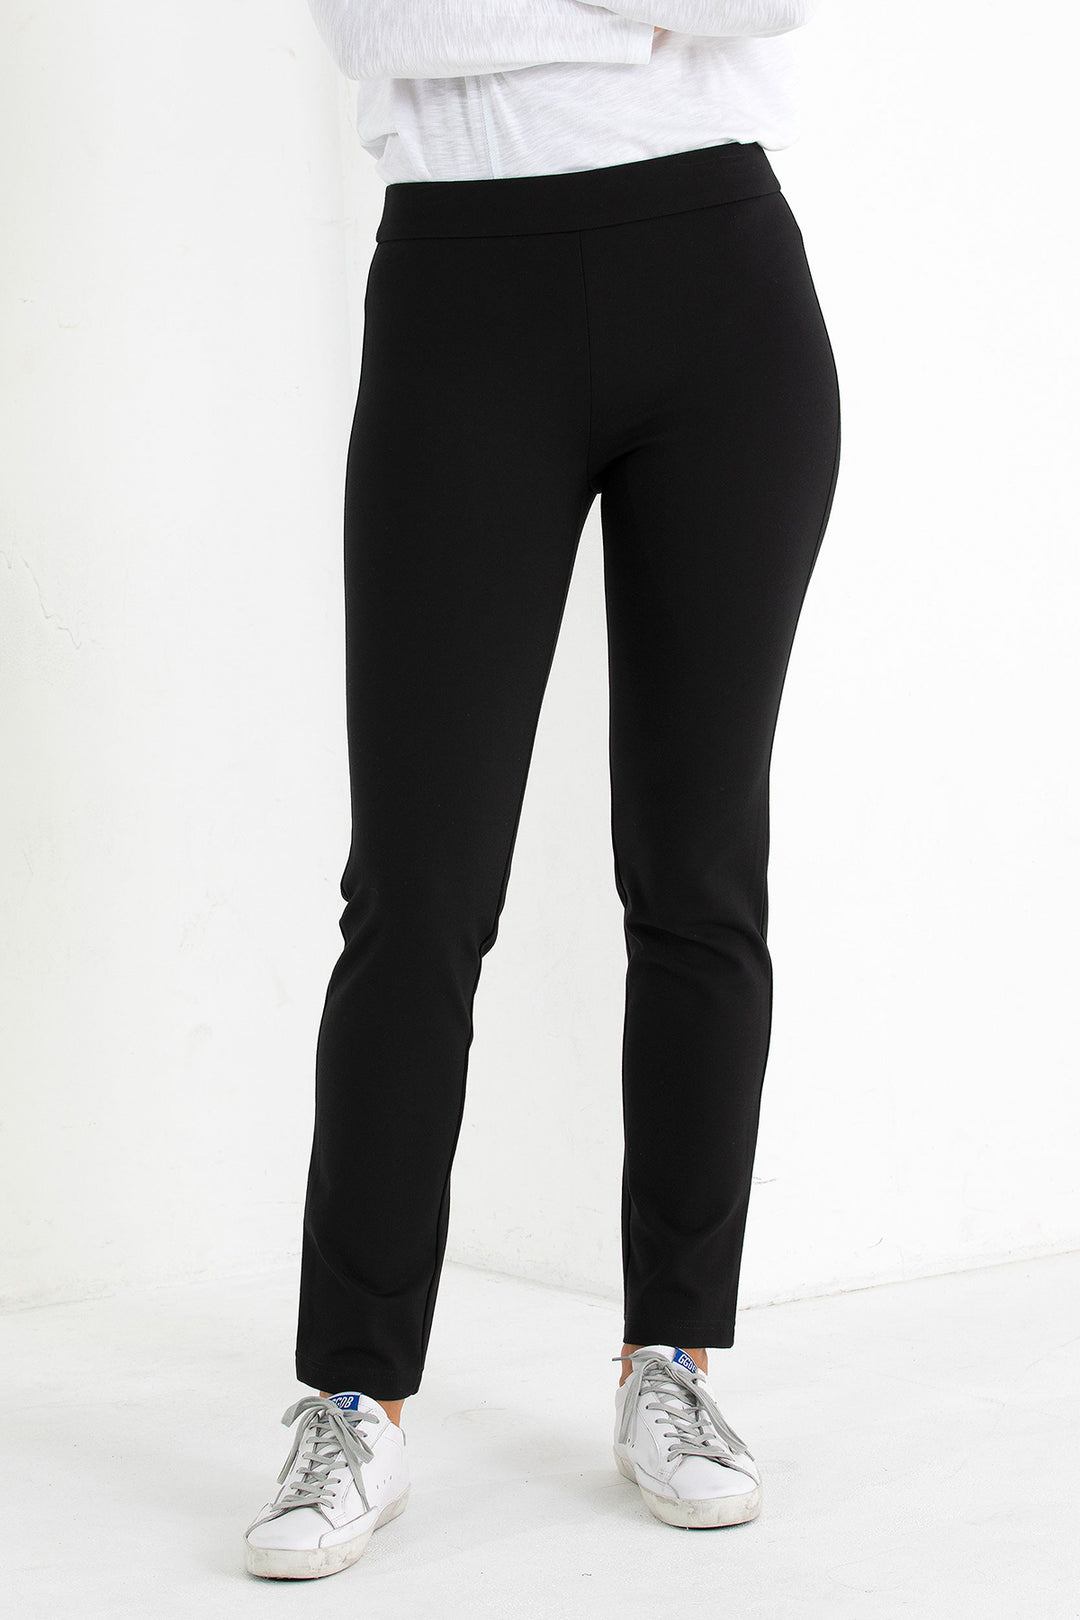 Marco Polo - Pull On Ponte Pants - Black - MP2 - Pizazz Boutique